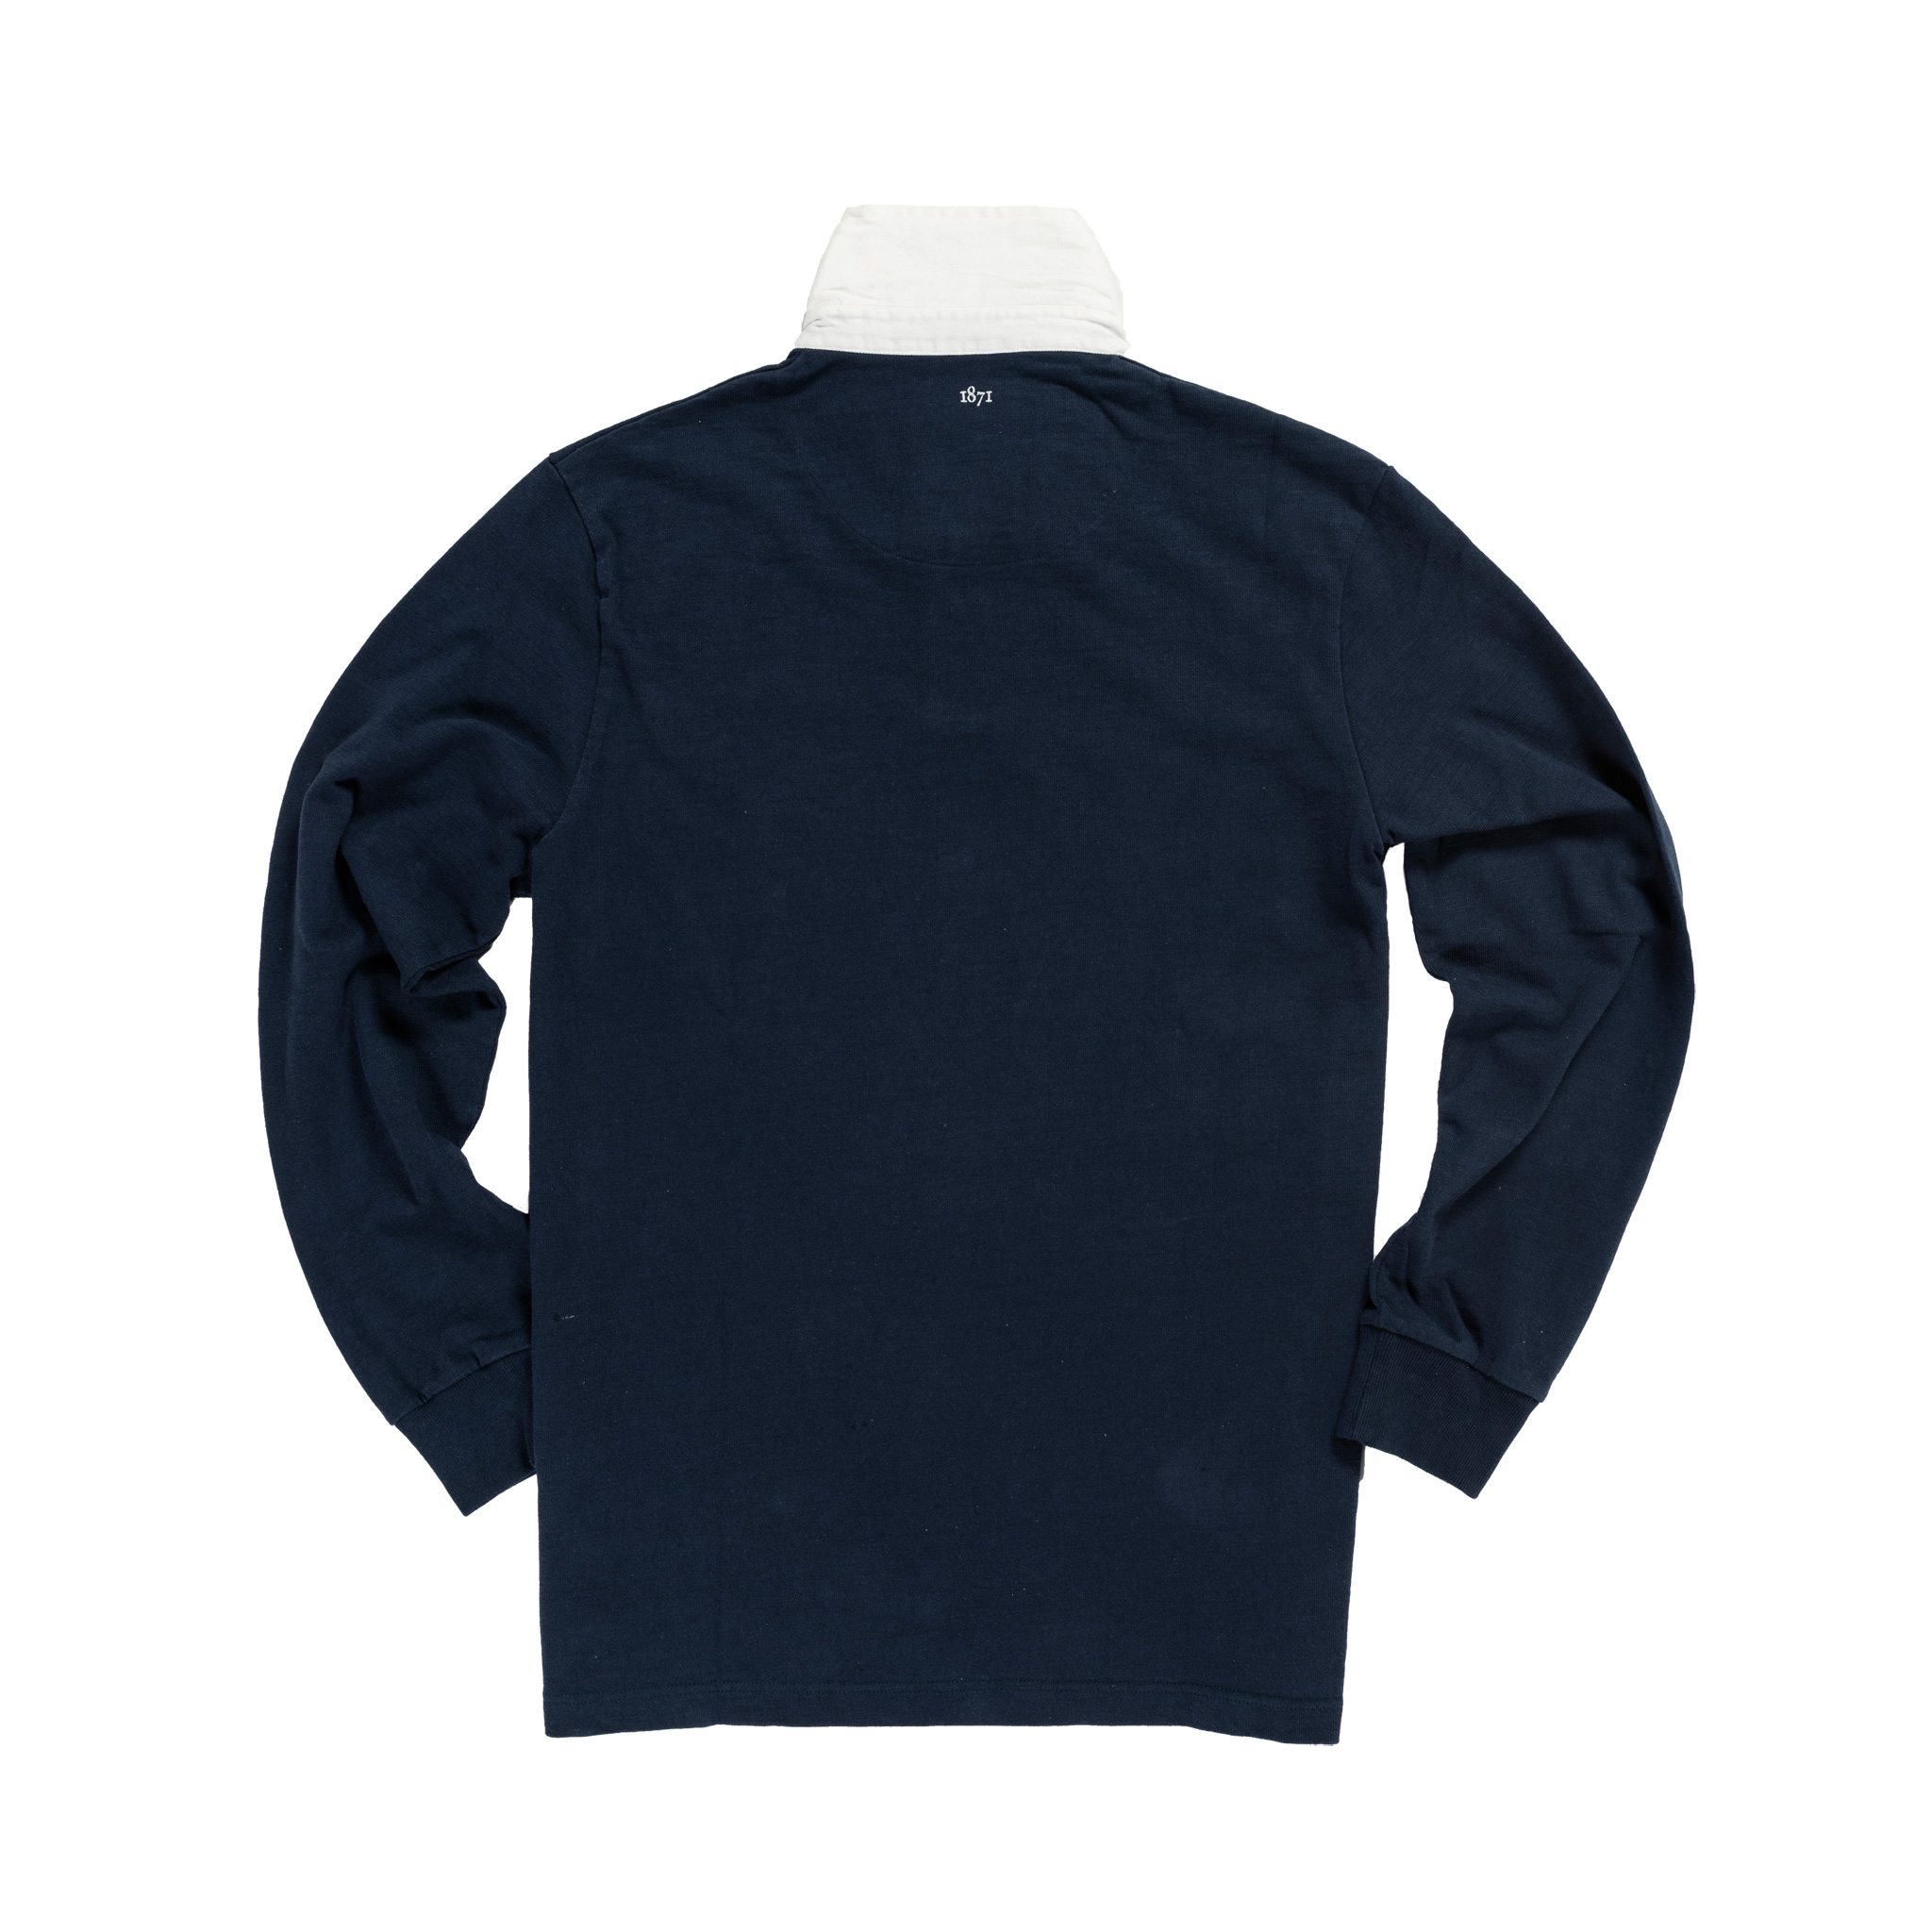 Oxford 1872 Vintage Rugby Shirt